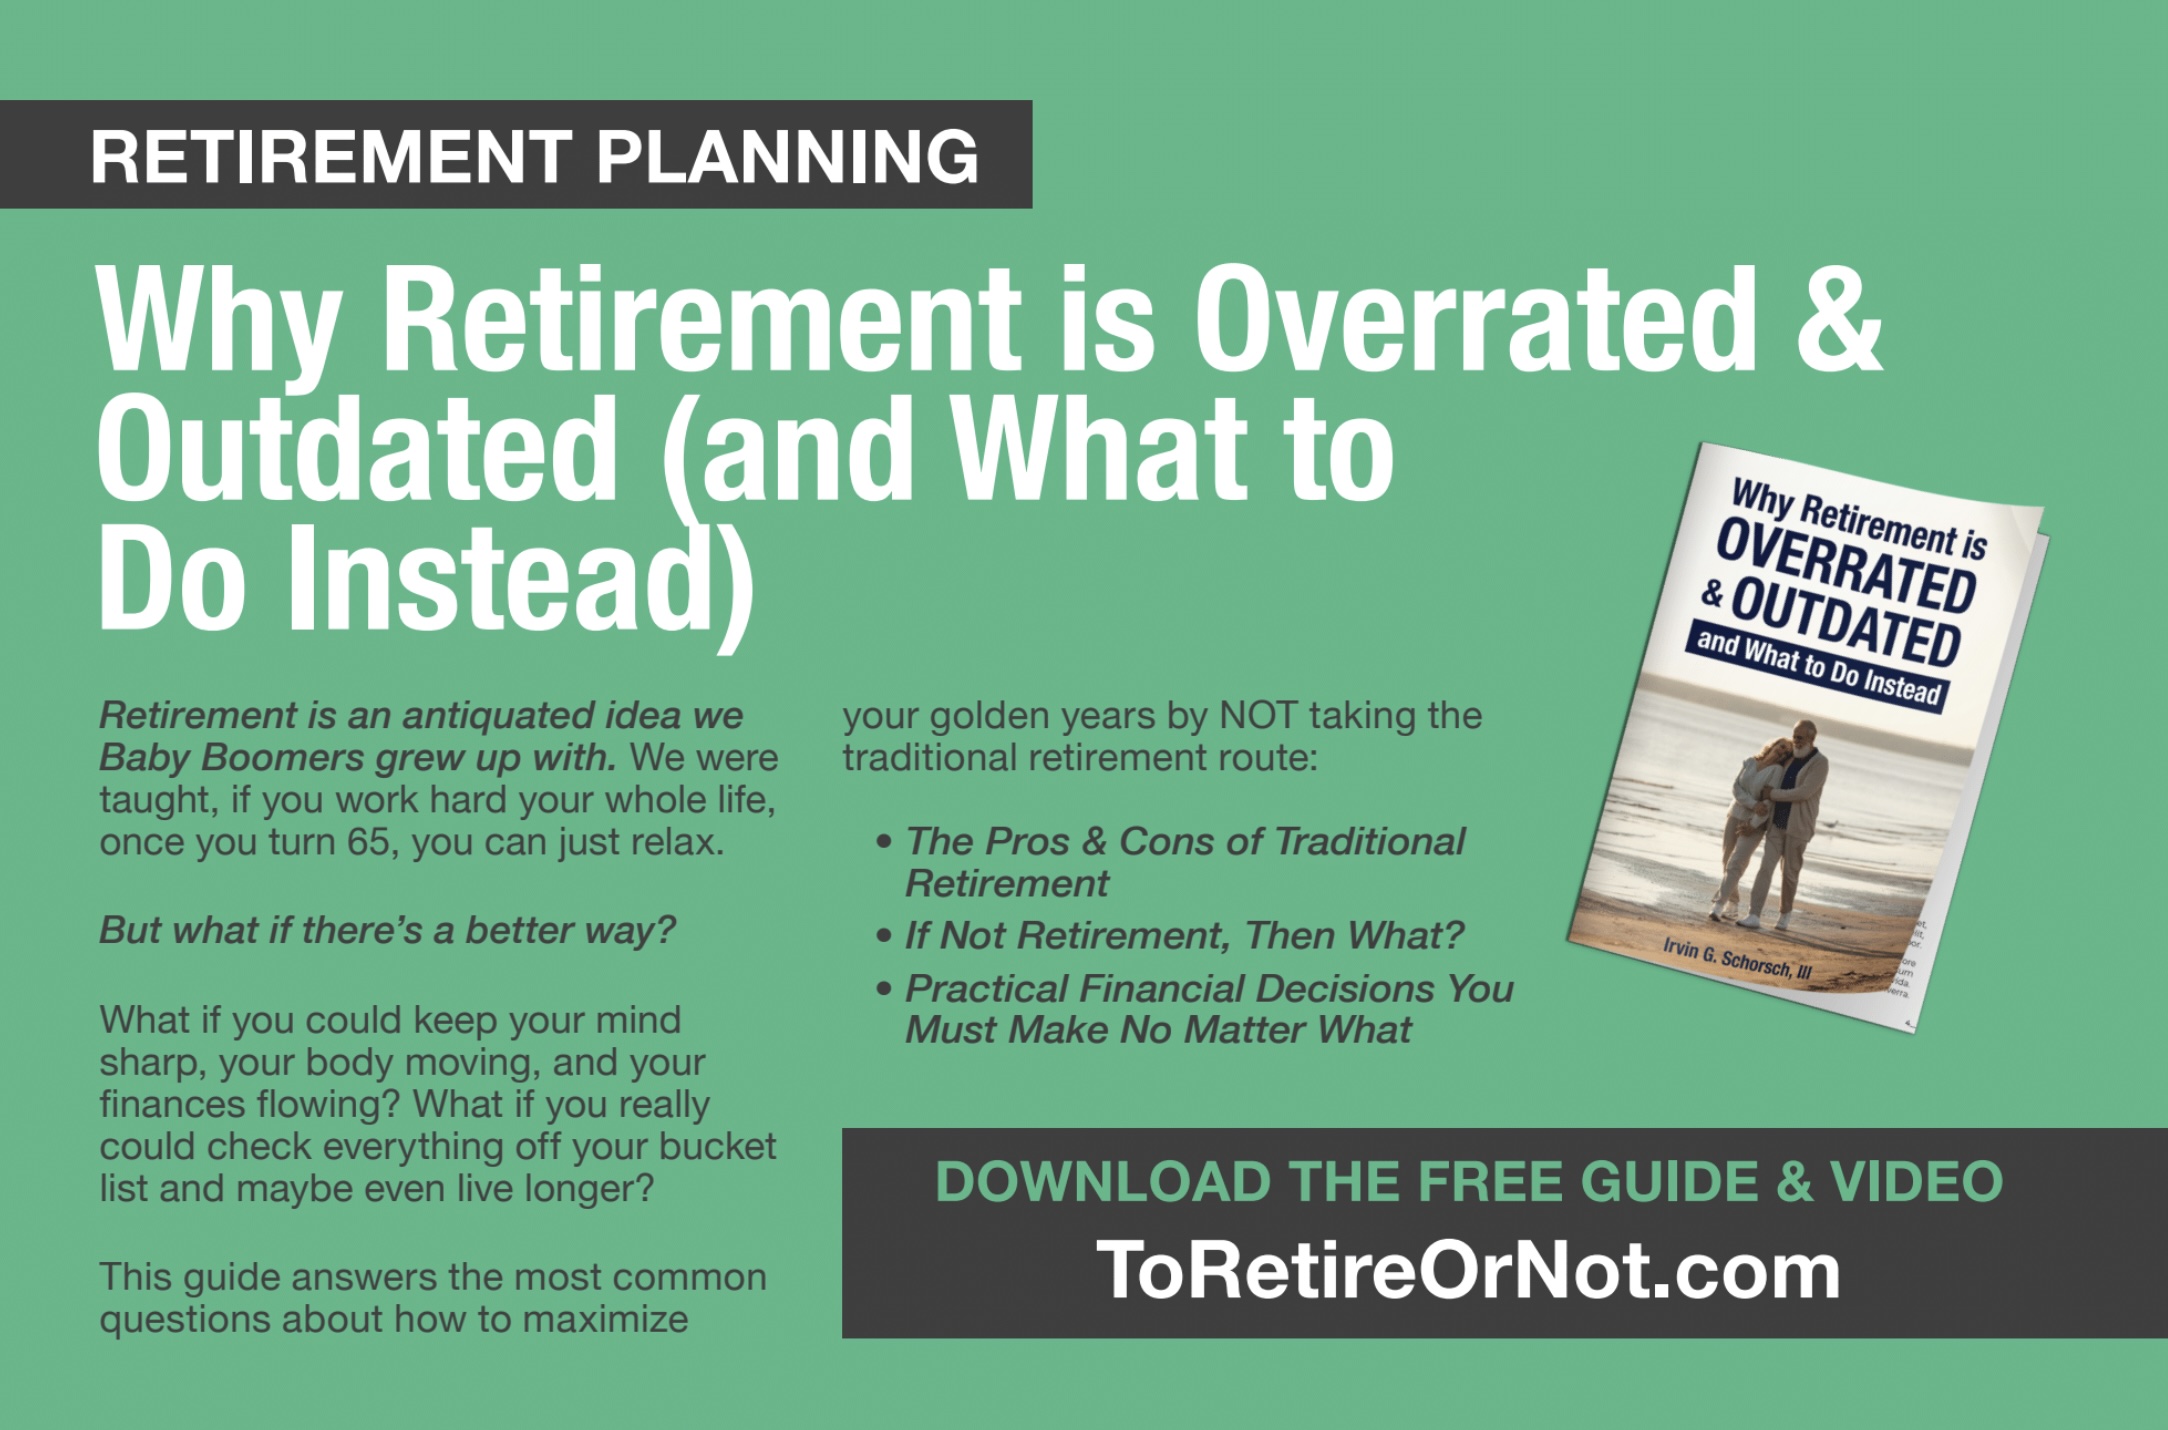 Why Retirement is Overrated & Outdated